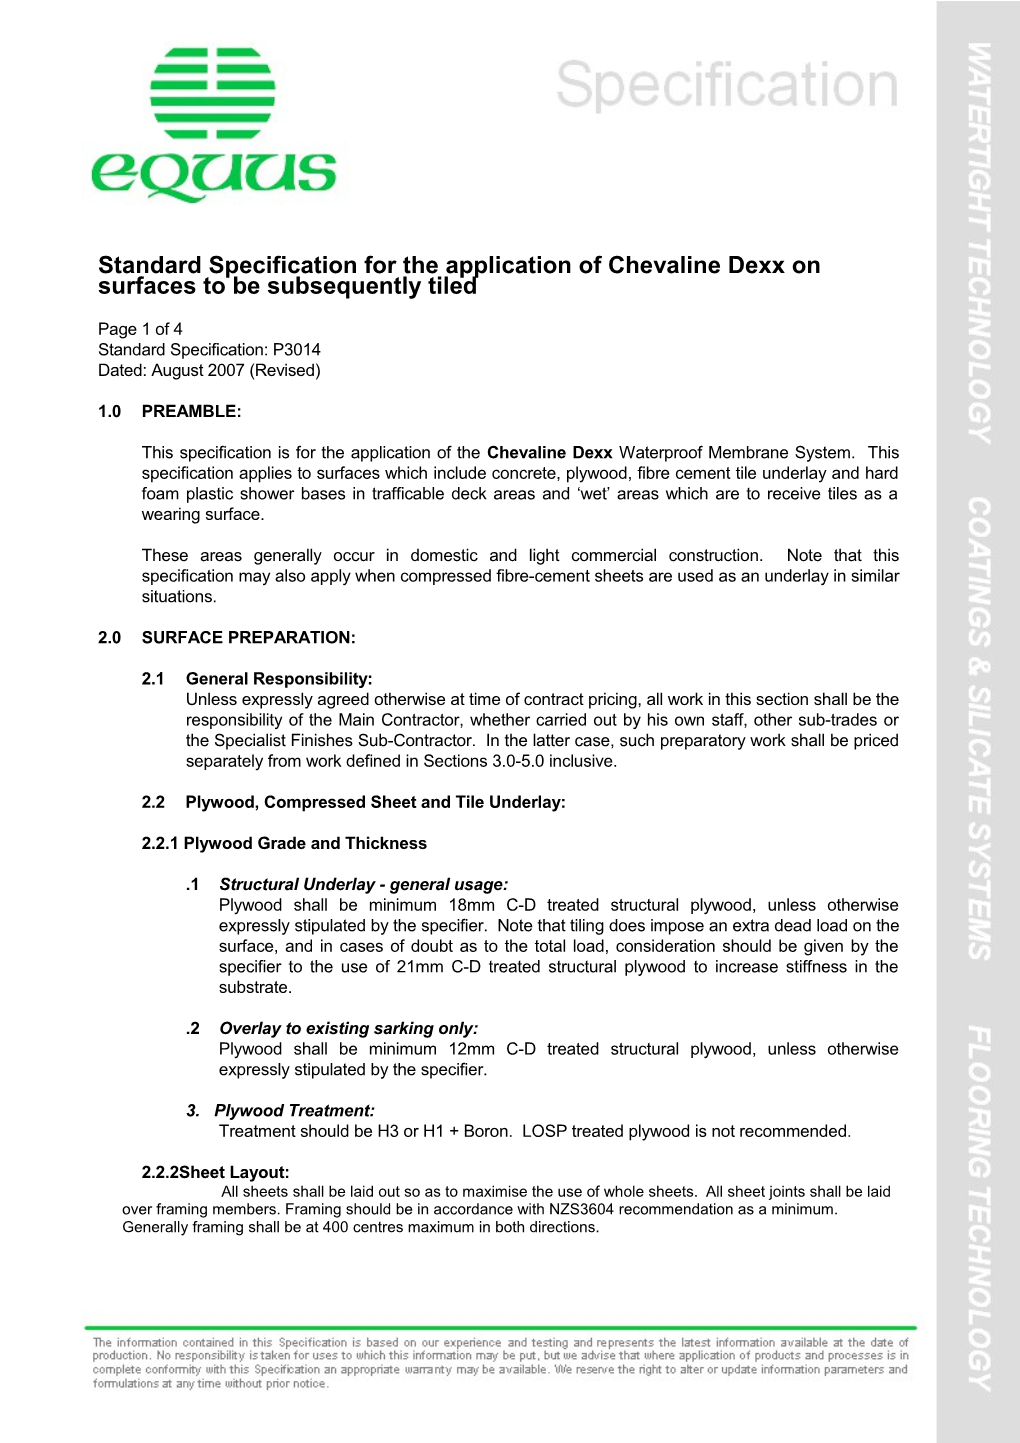 Standard Specification for the Application of Chevaline Dexx on Surfaces to Be Subsequently